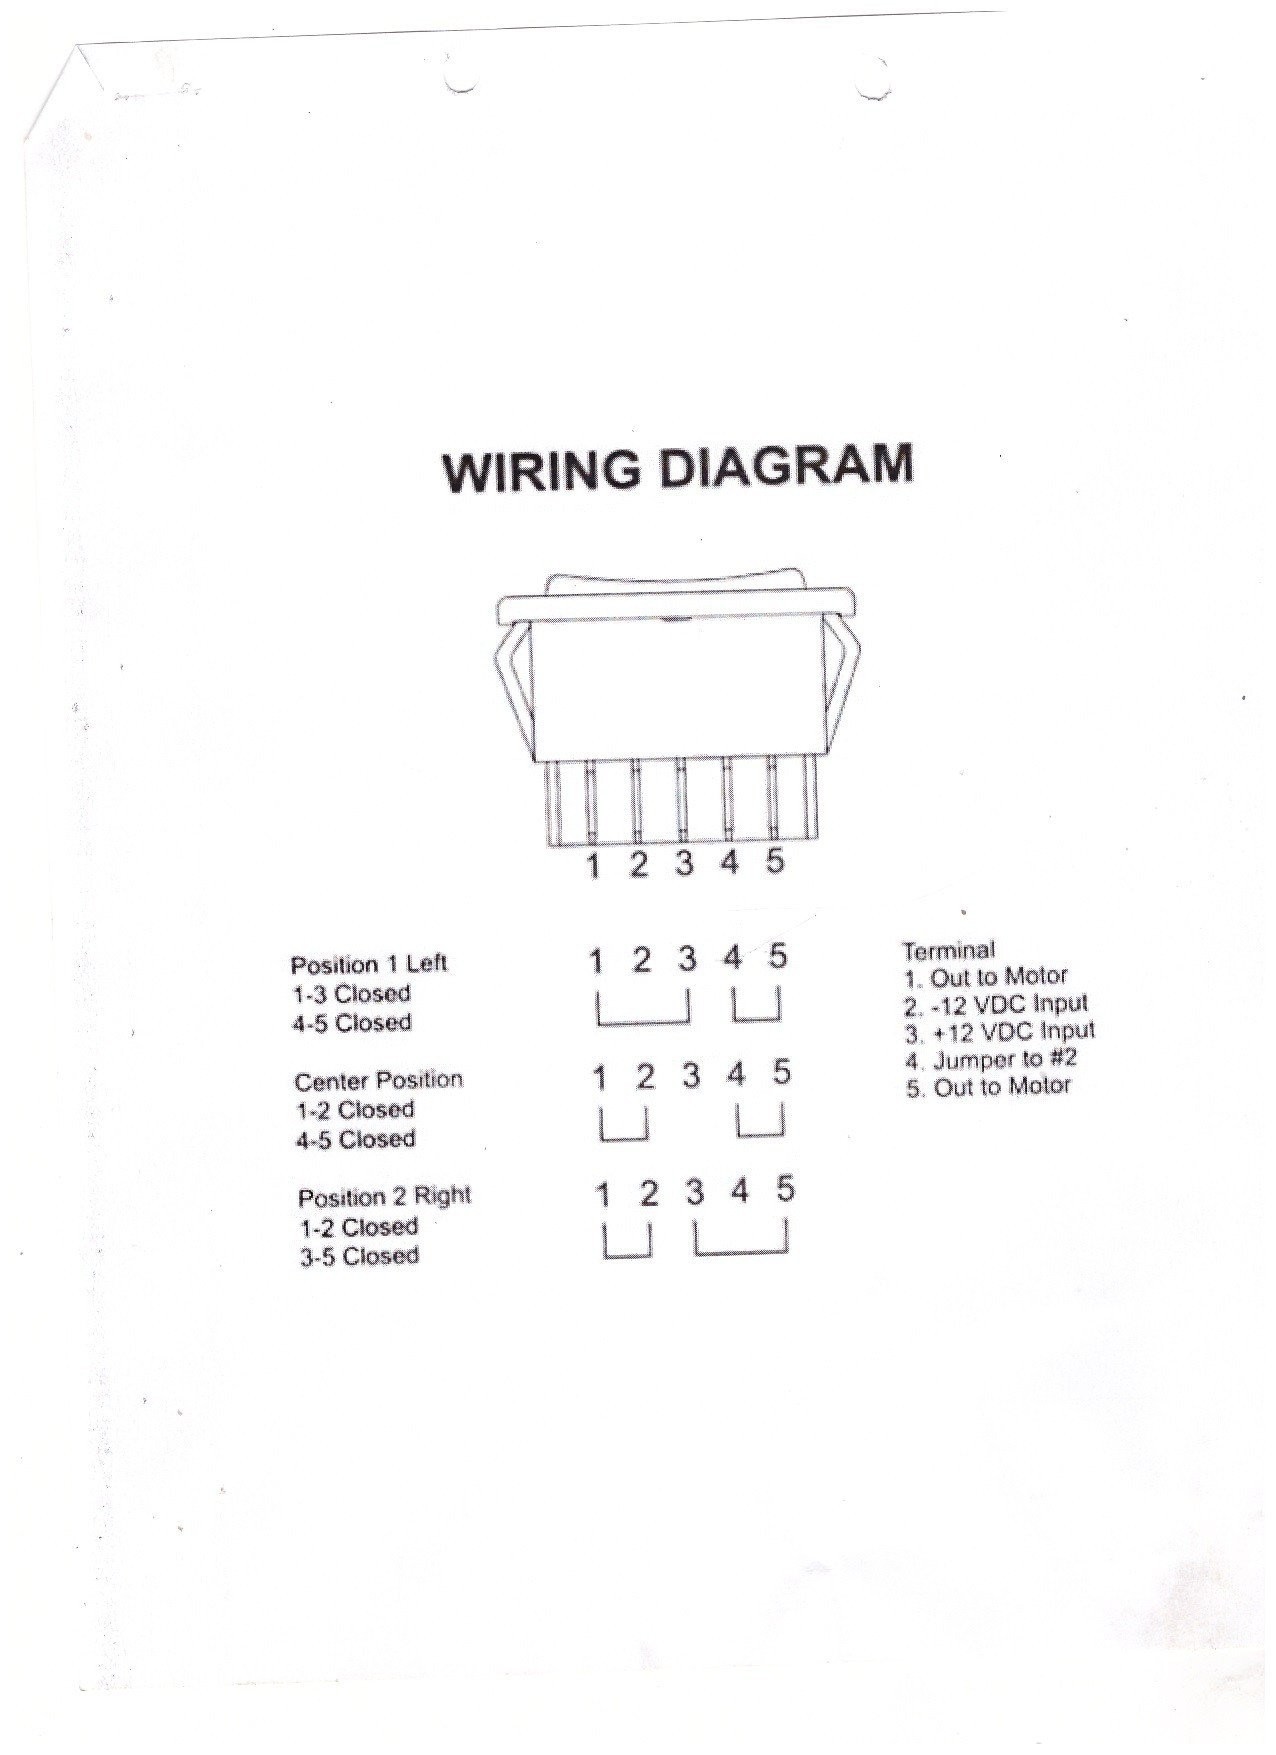 6 Pin Power Window Switch Wiring Diagram Elegant Category Wiring Diagram 142 Unique 6 Pin